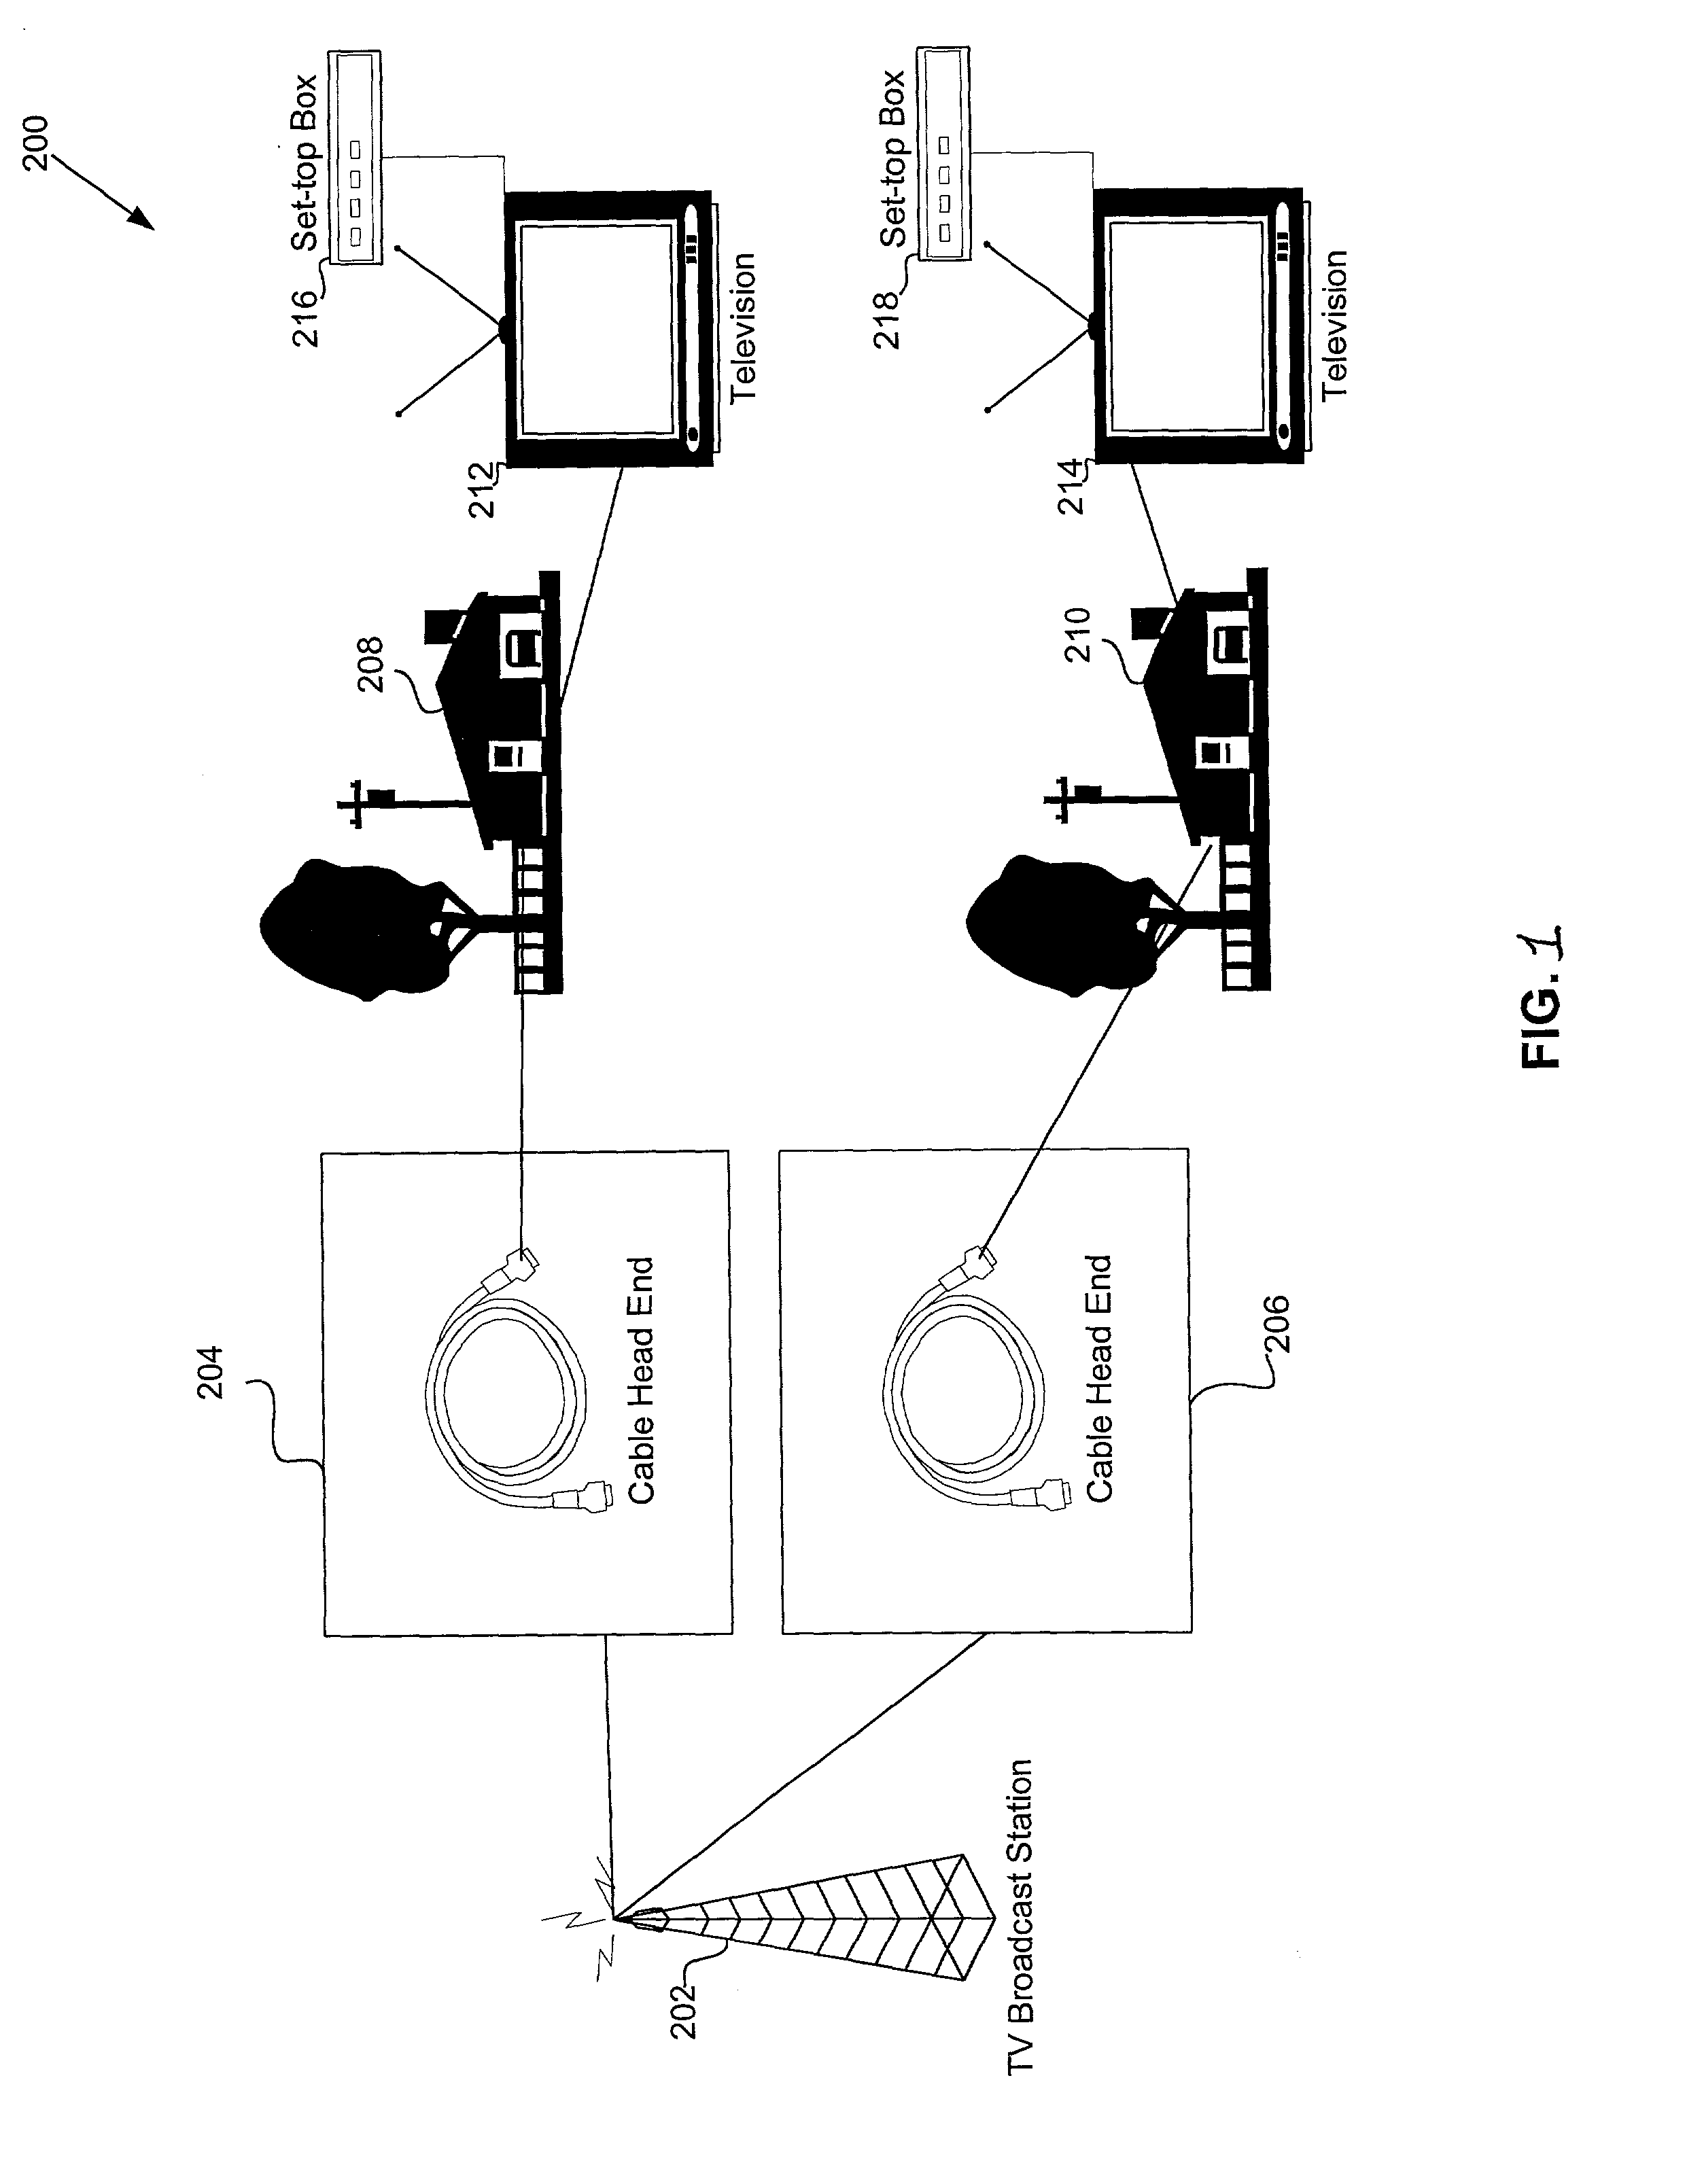 System and method for managing interactive programming and advertisements in interactive broadcast systems